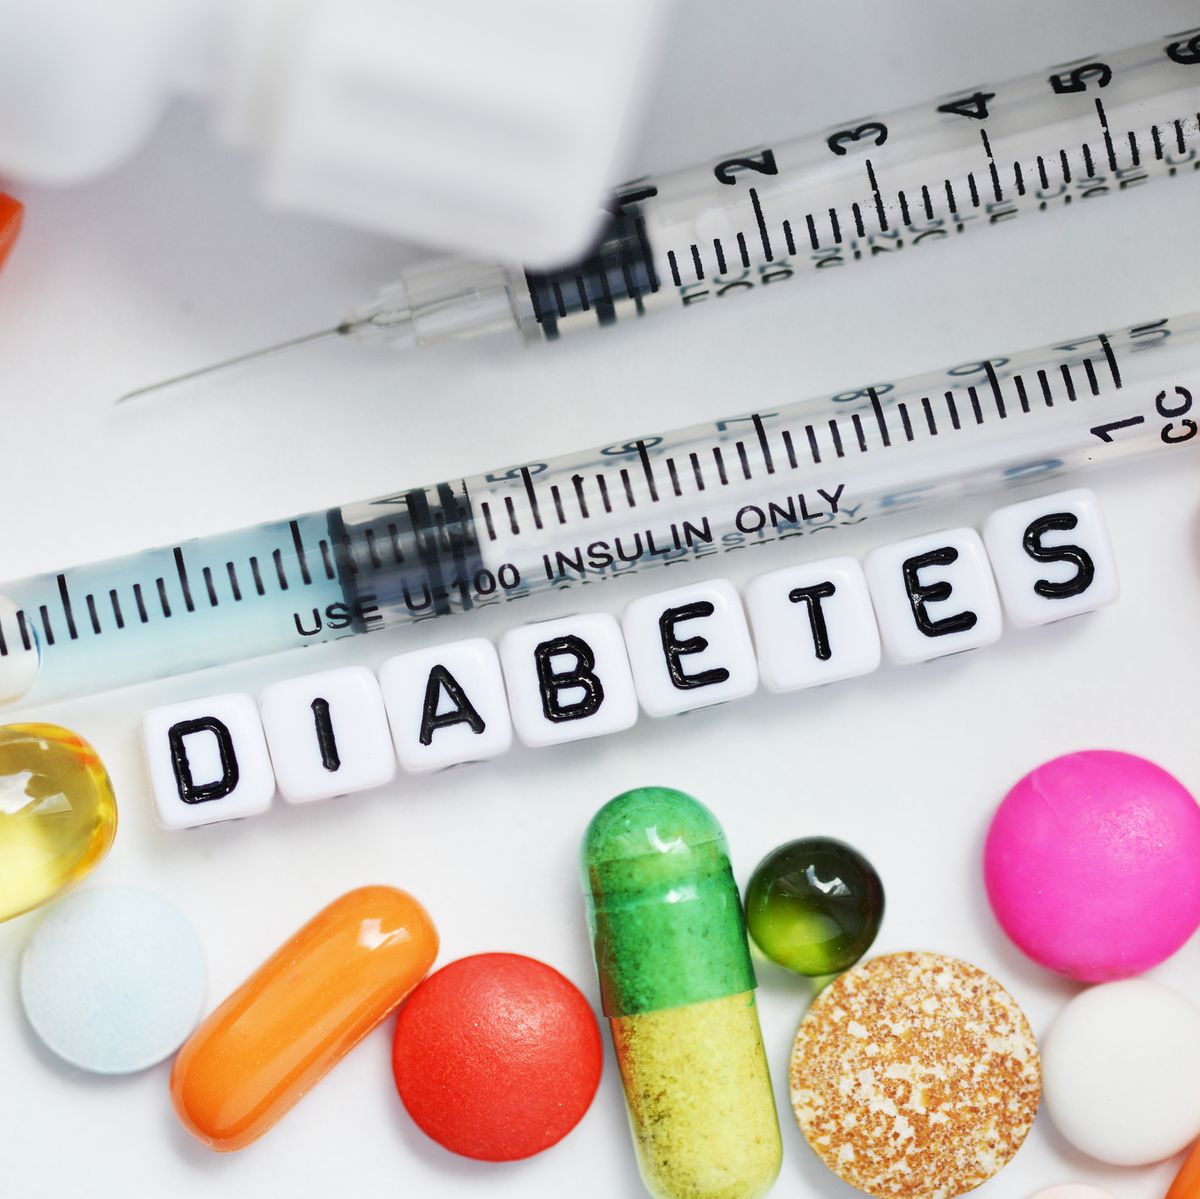 Diabetes overview: symptoms, causes, treatment, management and more